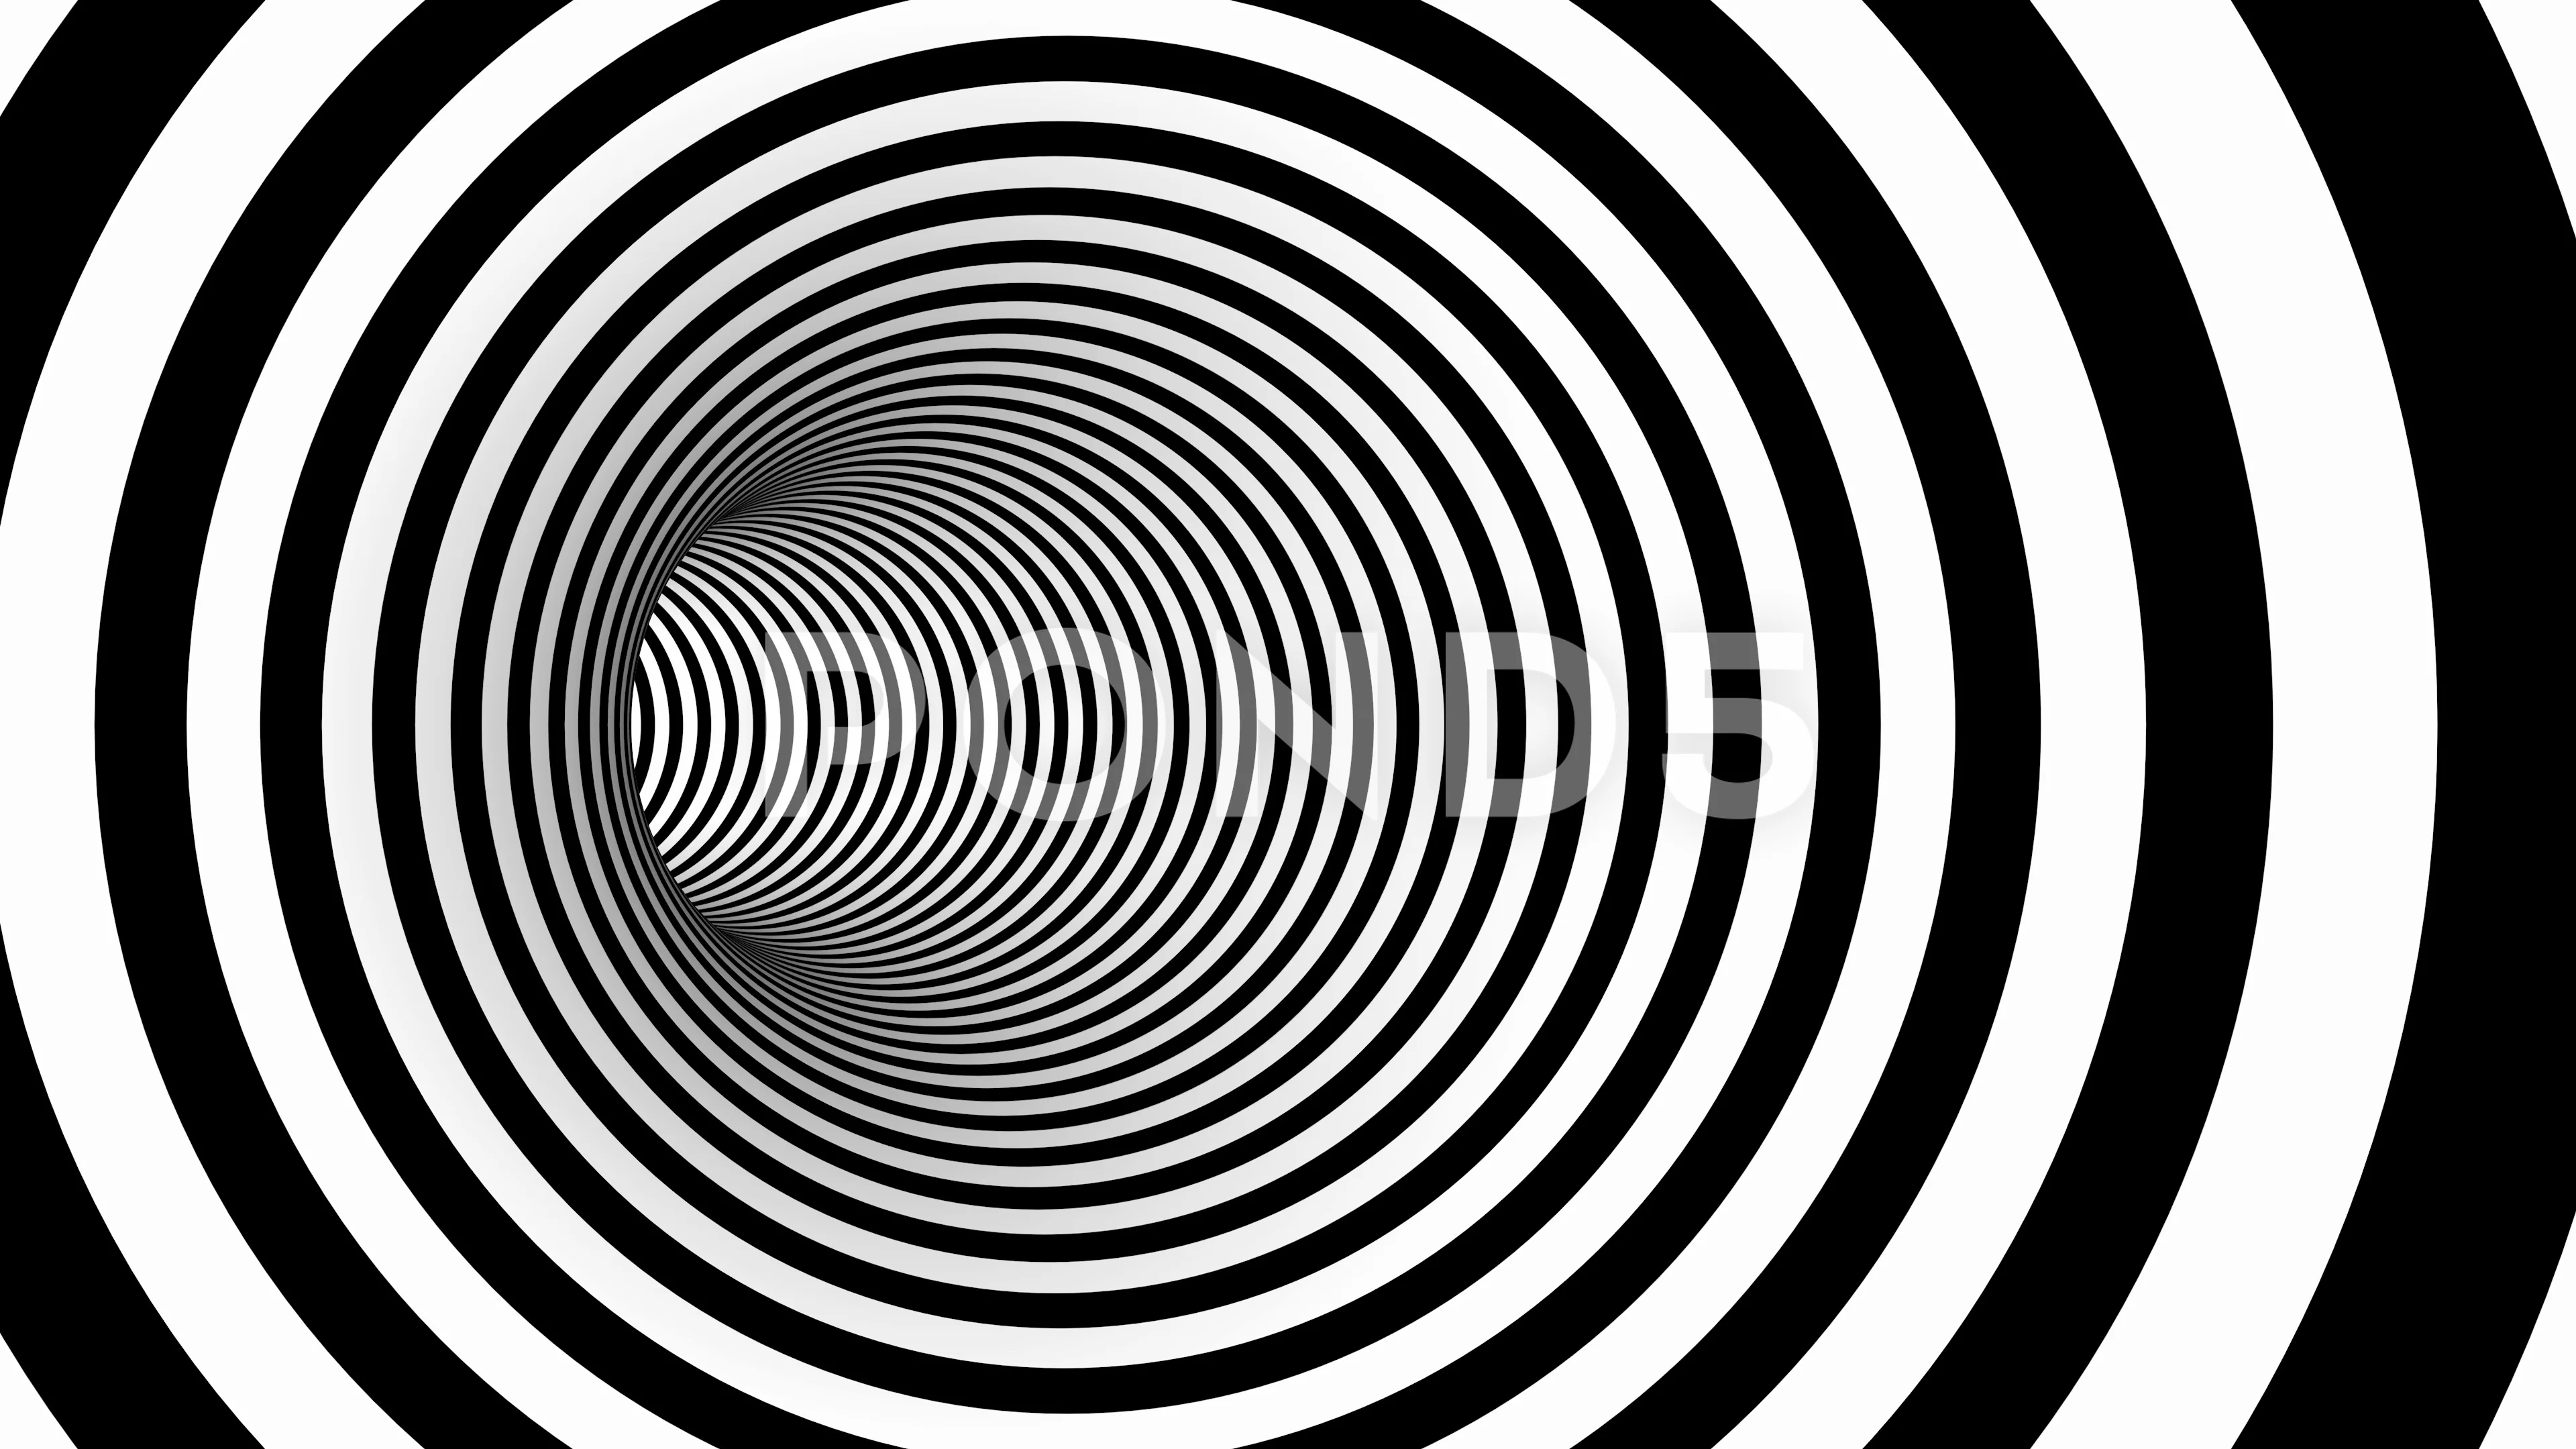 Abstract animated black and white spiral motion background, seamless loop.,  Motion Graphics